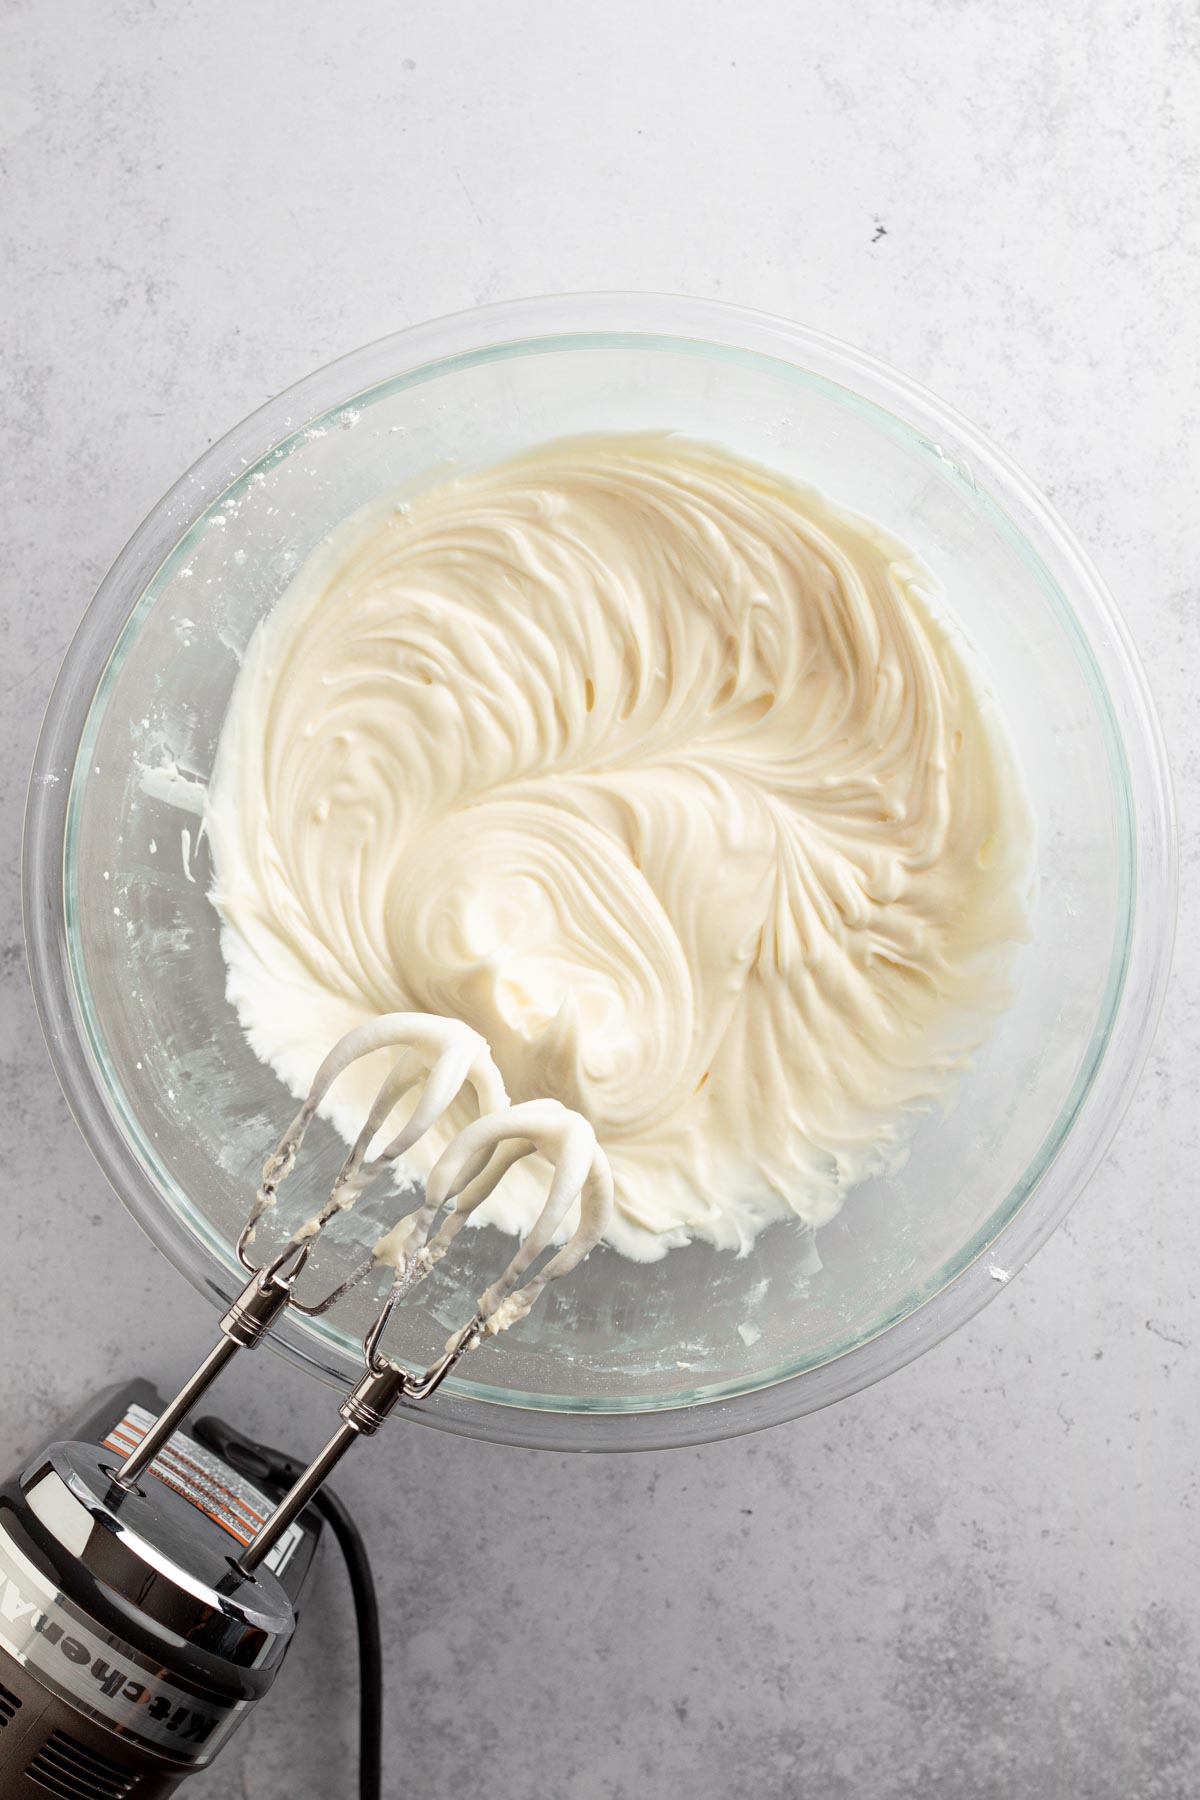 Cream cheese frosting in a glass mixing with an electric hand mixer.